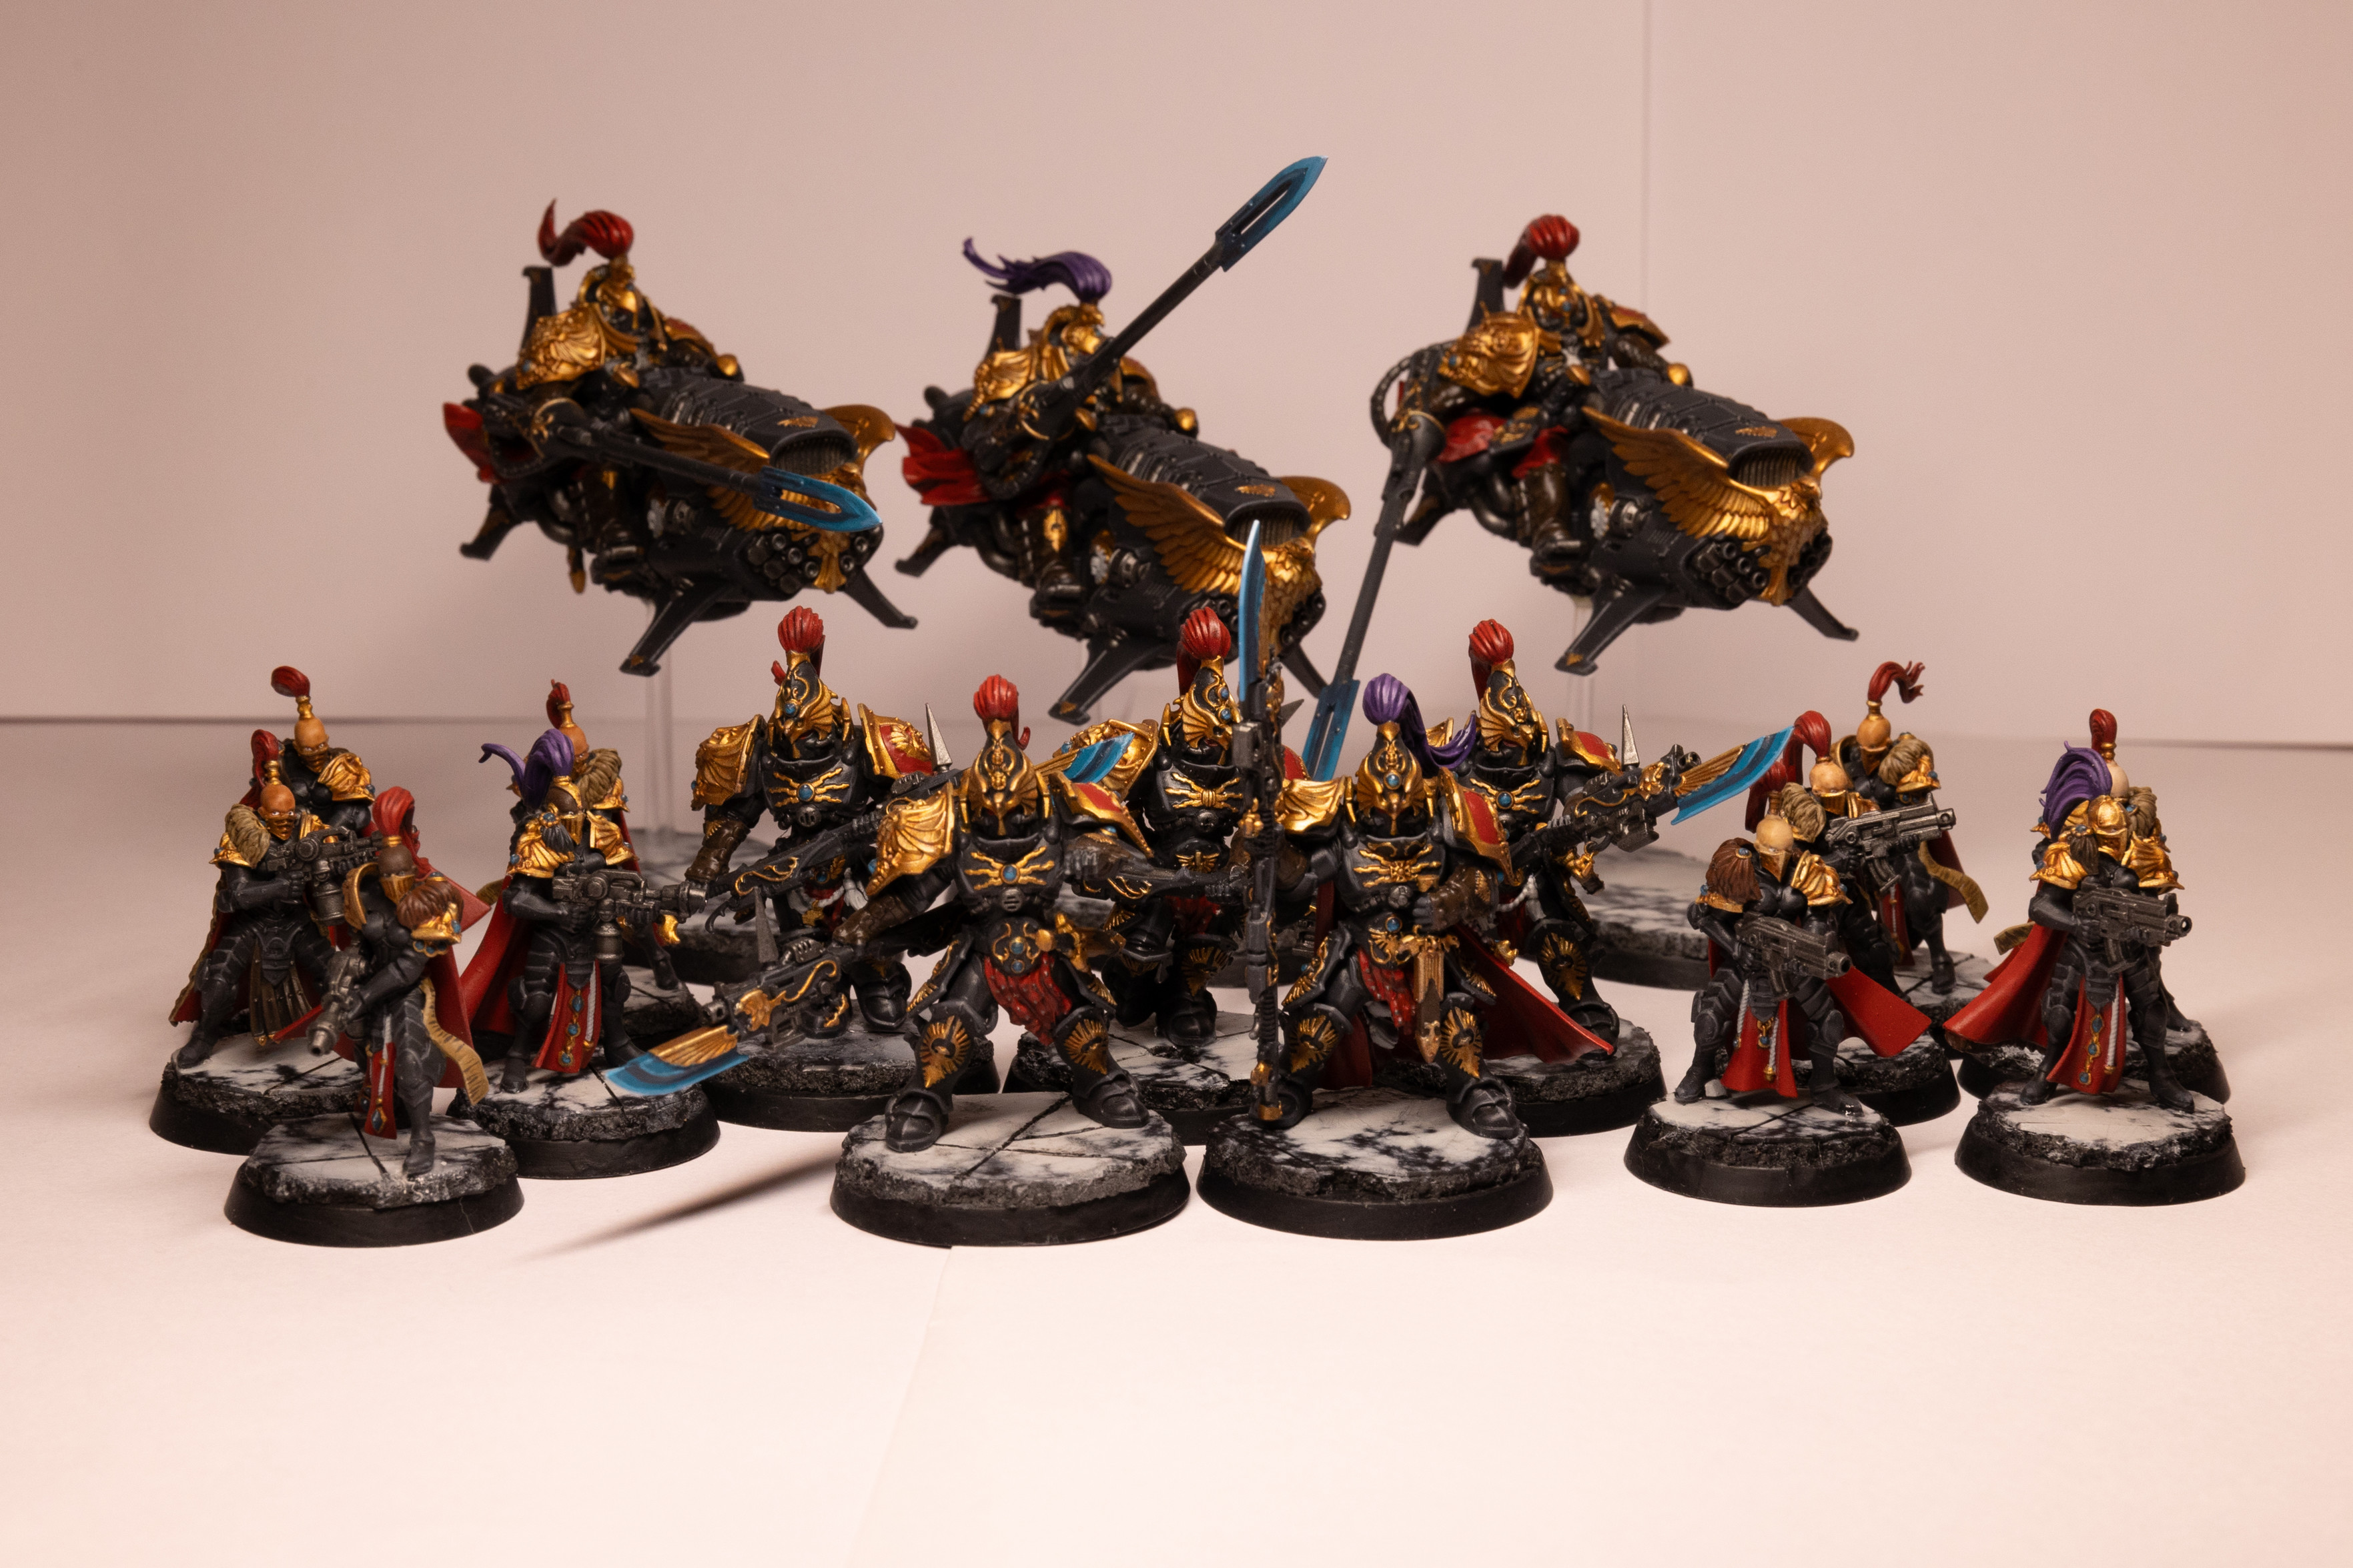 Small Warhammer 40k Custodes force in the Shadowkeepers colour scheme. In the front are five Custodian Guard, large armoured warriors in black armour with gold trim and red accents and head plume. They are weilding large spear like weapons with glowing blue tips. Either side are them are two groups of five Sisters of Silence, sleekly armoured warriors in black and gold, with red accents. They are holding either a flame weapon or bolt gun. They are either bald and a top knot red plume, or have a gold helmet with head plume. At the back are three Vertus Praetors. They are three large jet bike vechiles each piloted by a warrior in large armour. They are black and gold with red accents and head plumes. On the front of each bike is a large golden eagle. Each warrior carries a long lance like weapon with a glowing blue tip. All models are mounted to a black and while marble-like base.